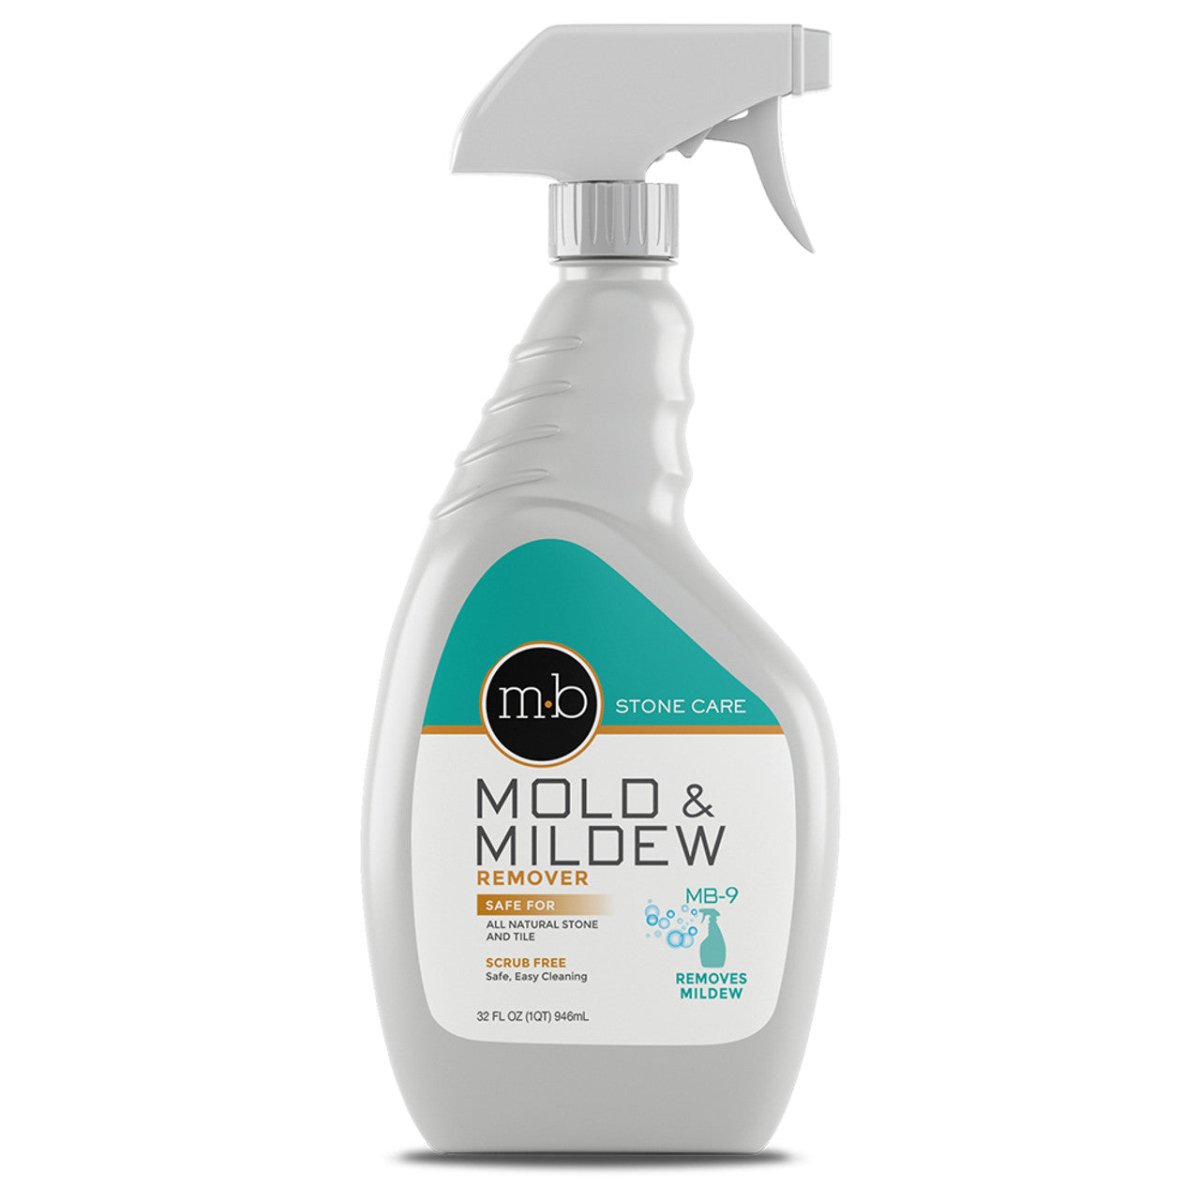 MB-9 Mold & Mildew - MB Stone Care